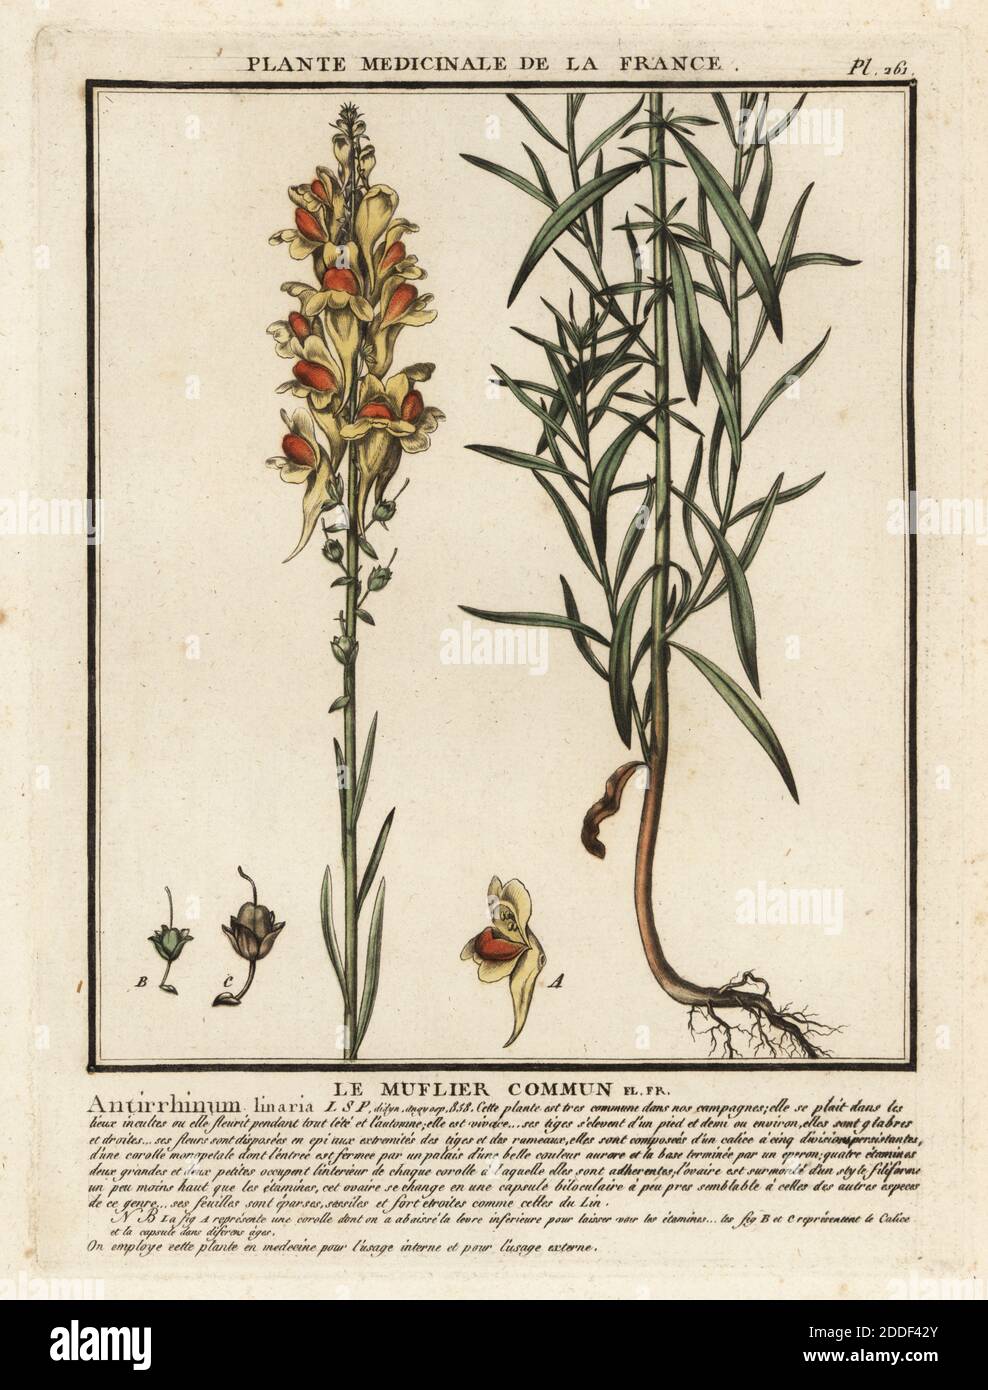 Common toadflax, Linaria vulgaris. Le muflier commun, Antirrhinum linaria. Copperplate engraving printed in three colours by Pierre Bulliard from his Herbier de la France, ou collection complete des plantes indigenes de ce royaume, Didot jeune, Debure et Belin, 1780-1793. Stock Photo